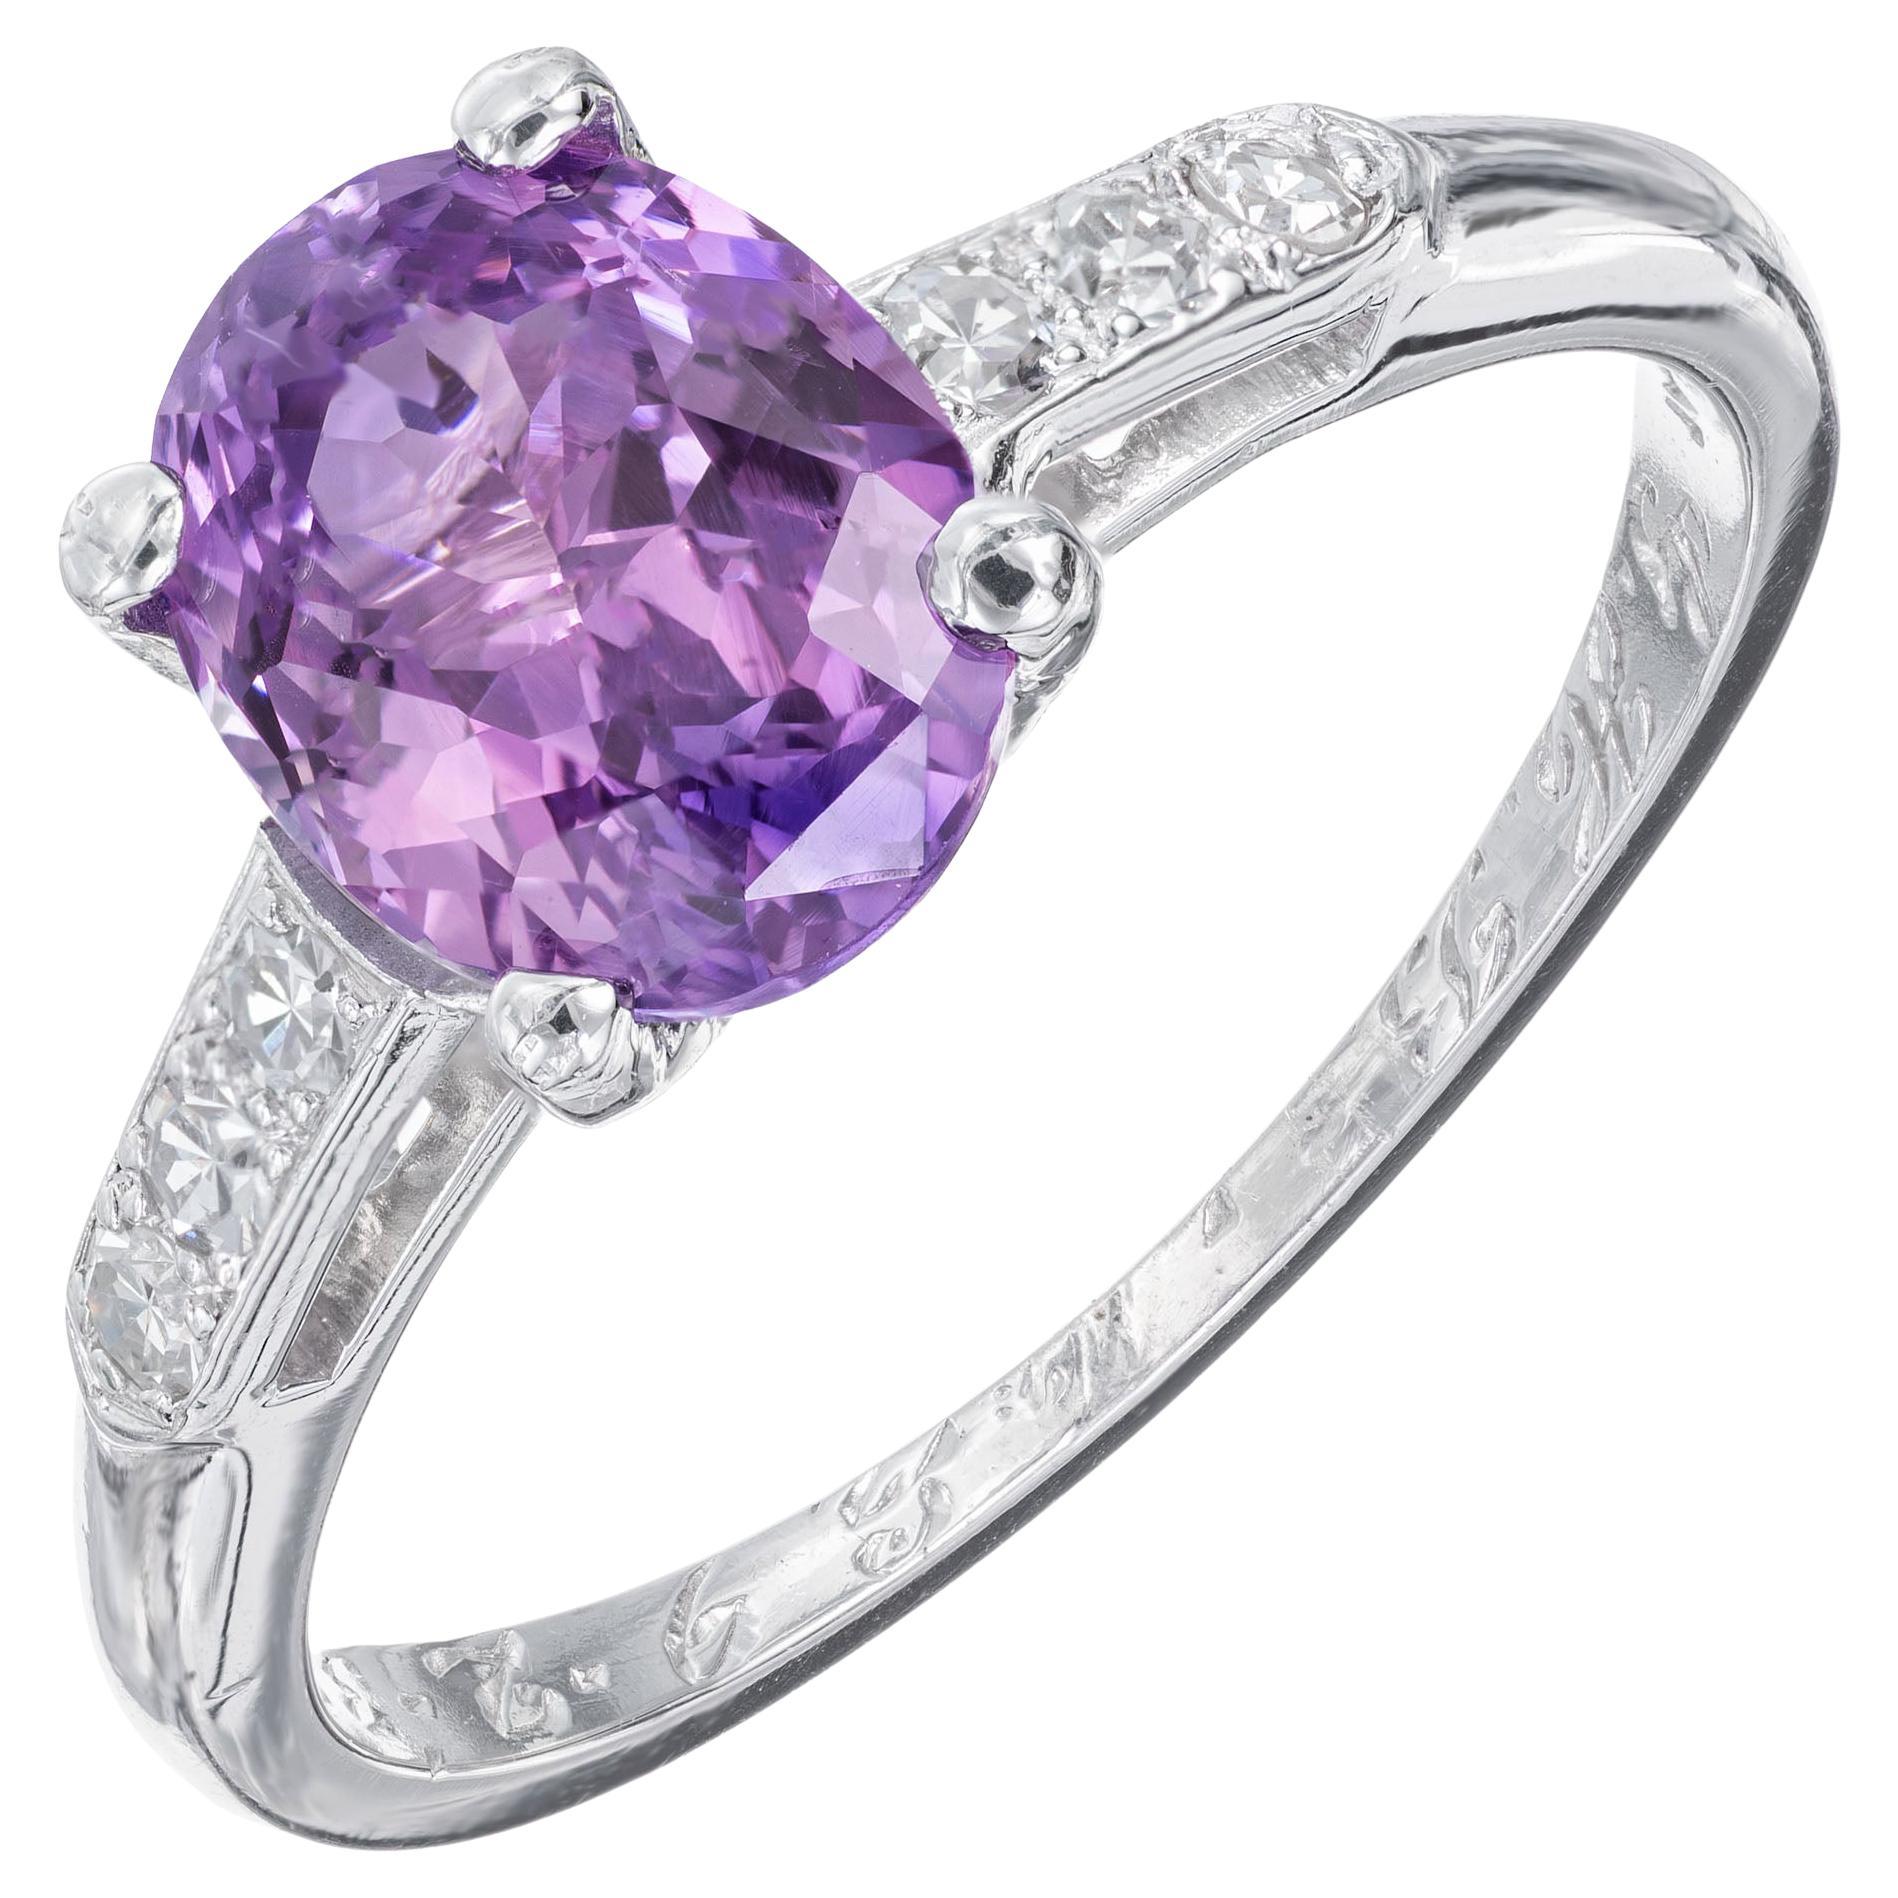 Unique Ring Moissanite Ring. 2.40 ct Purple Stone Ring Vintage Art Deco Ring Amethyst Wedding Engagement Bridal Ring Solitaire Ring